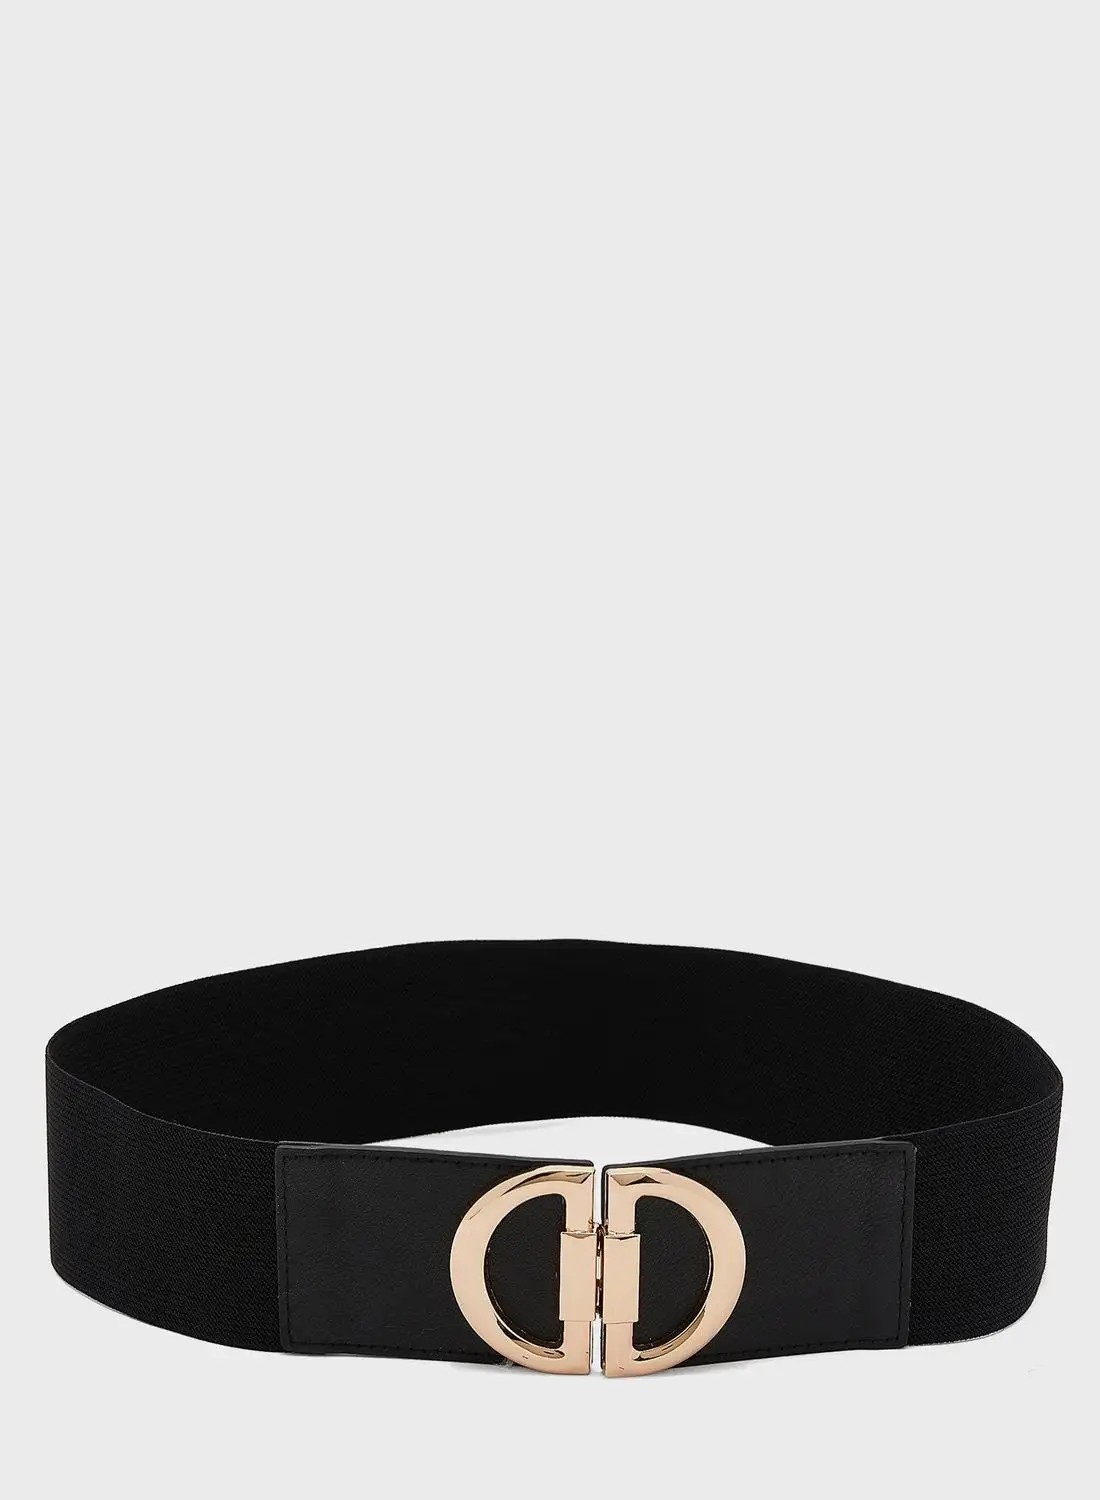 NEW LOOK D BUCKLE STRETCH